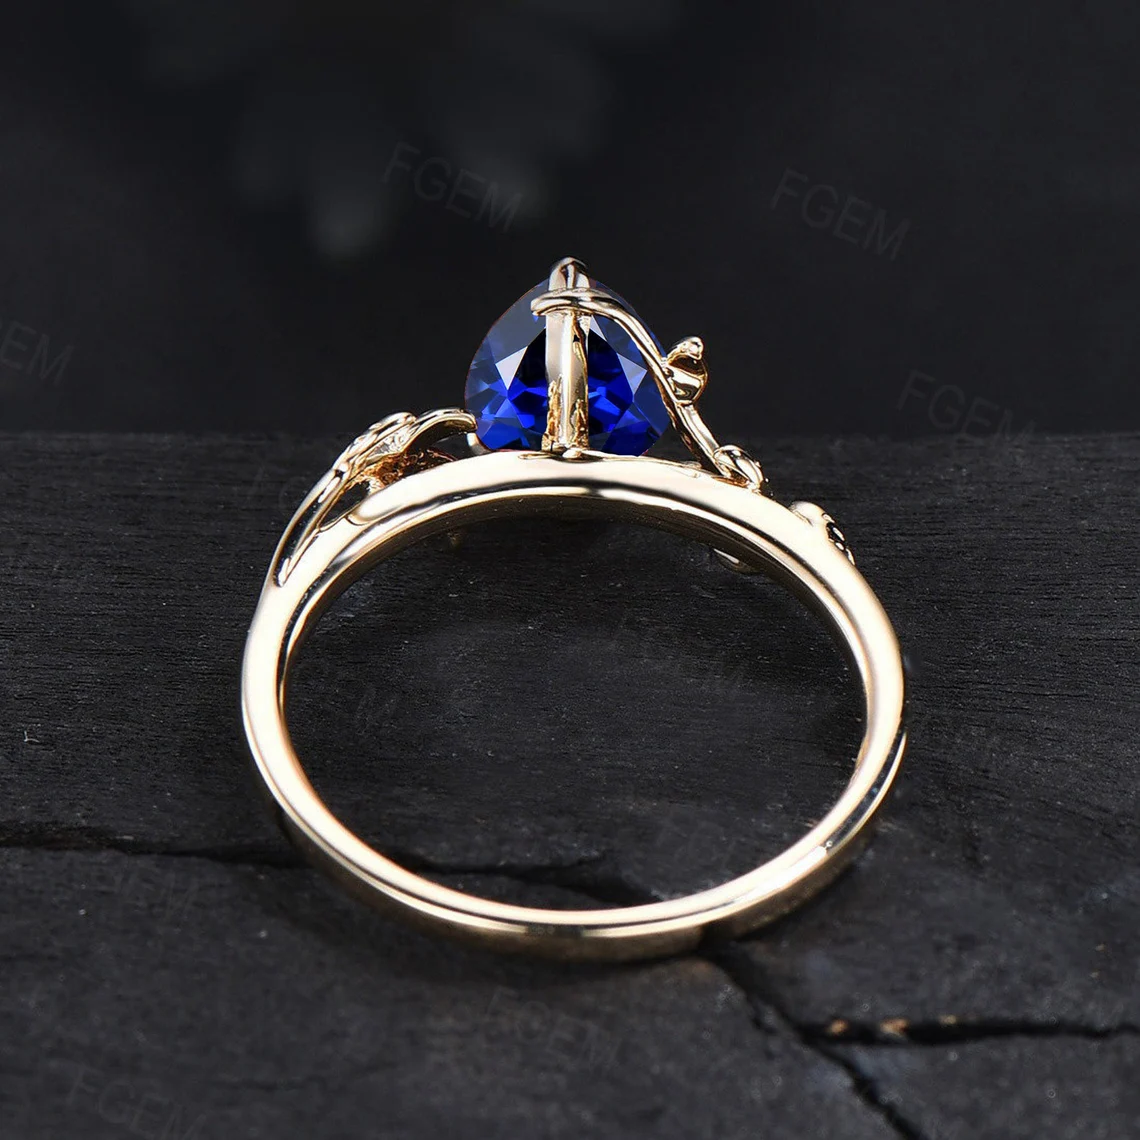 Yellow Gold Blue Sapphire Nature Engagement Ring Vintage 1.25ct Pear Blue Sapphire Wedding Ring September Birthstone Gemstone Jewelry Gifts